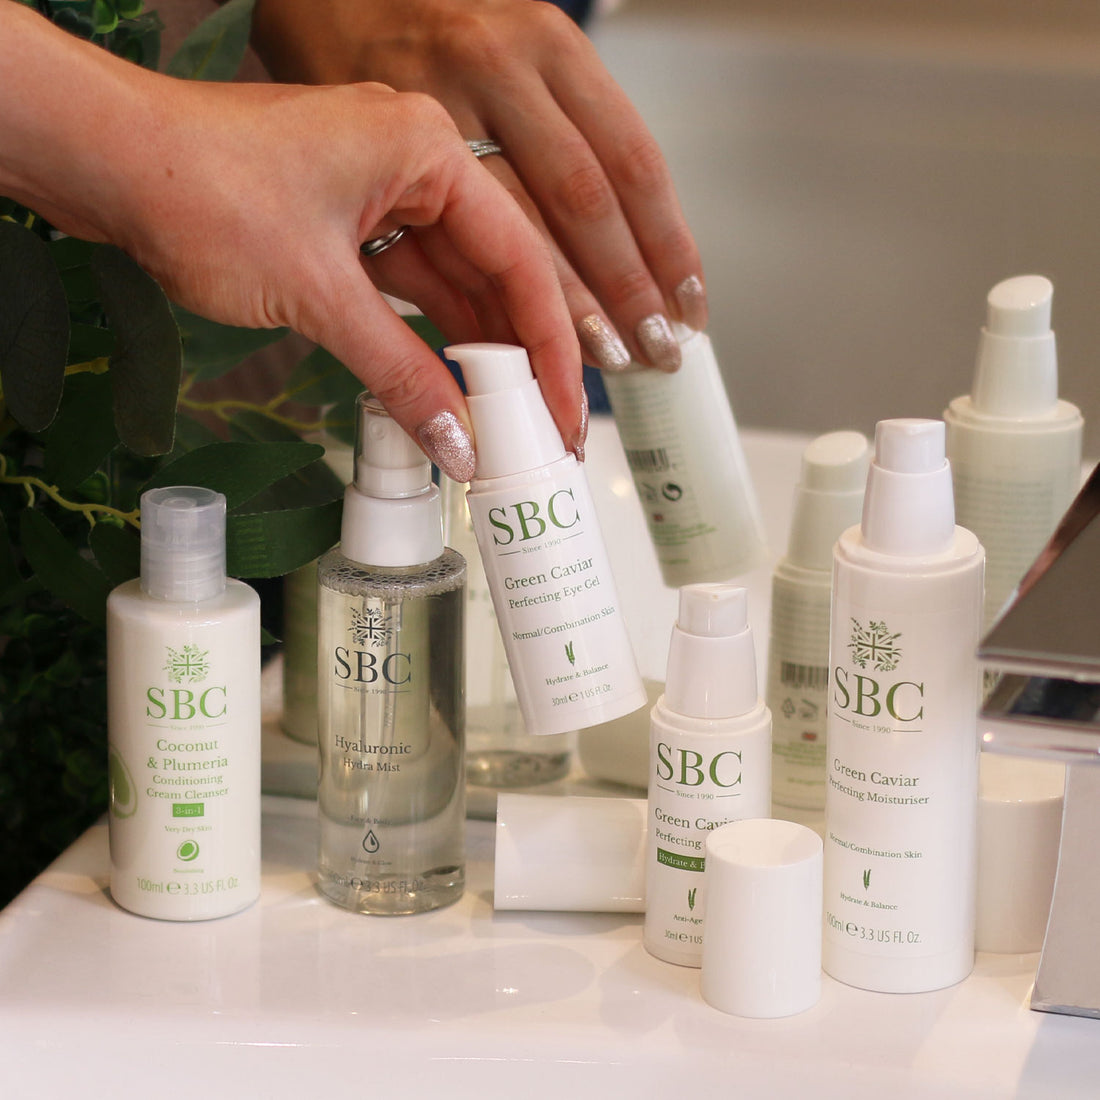 SBC Skincare's Vegan Products with a hand selecting Green Caviar Perfecting Serum